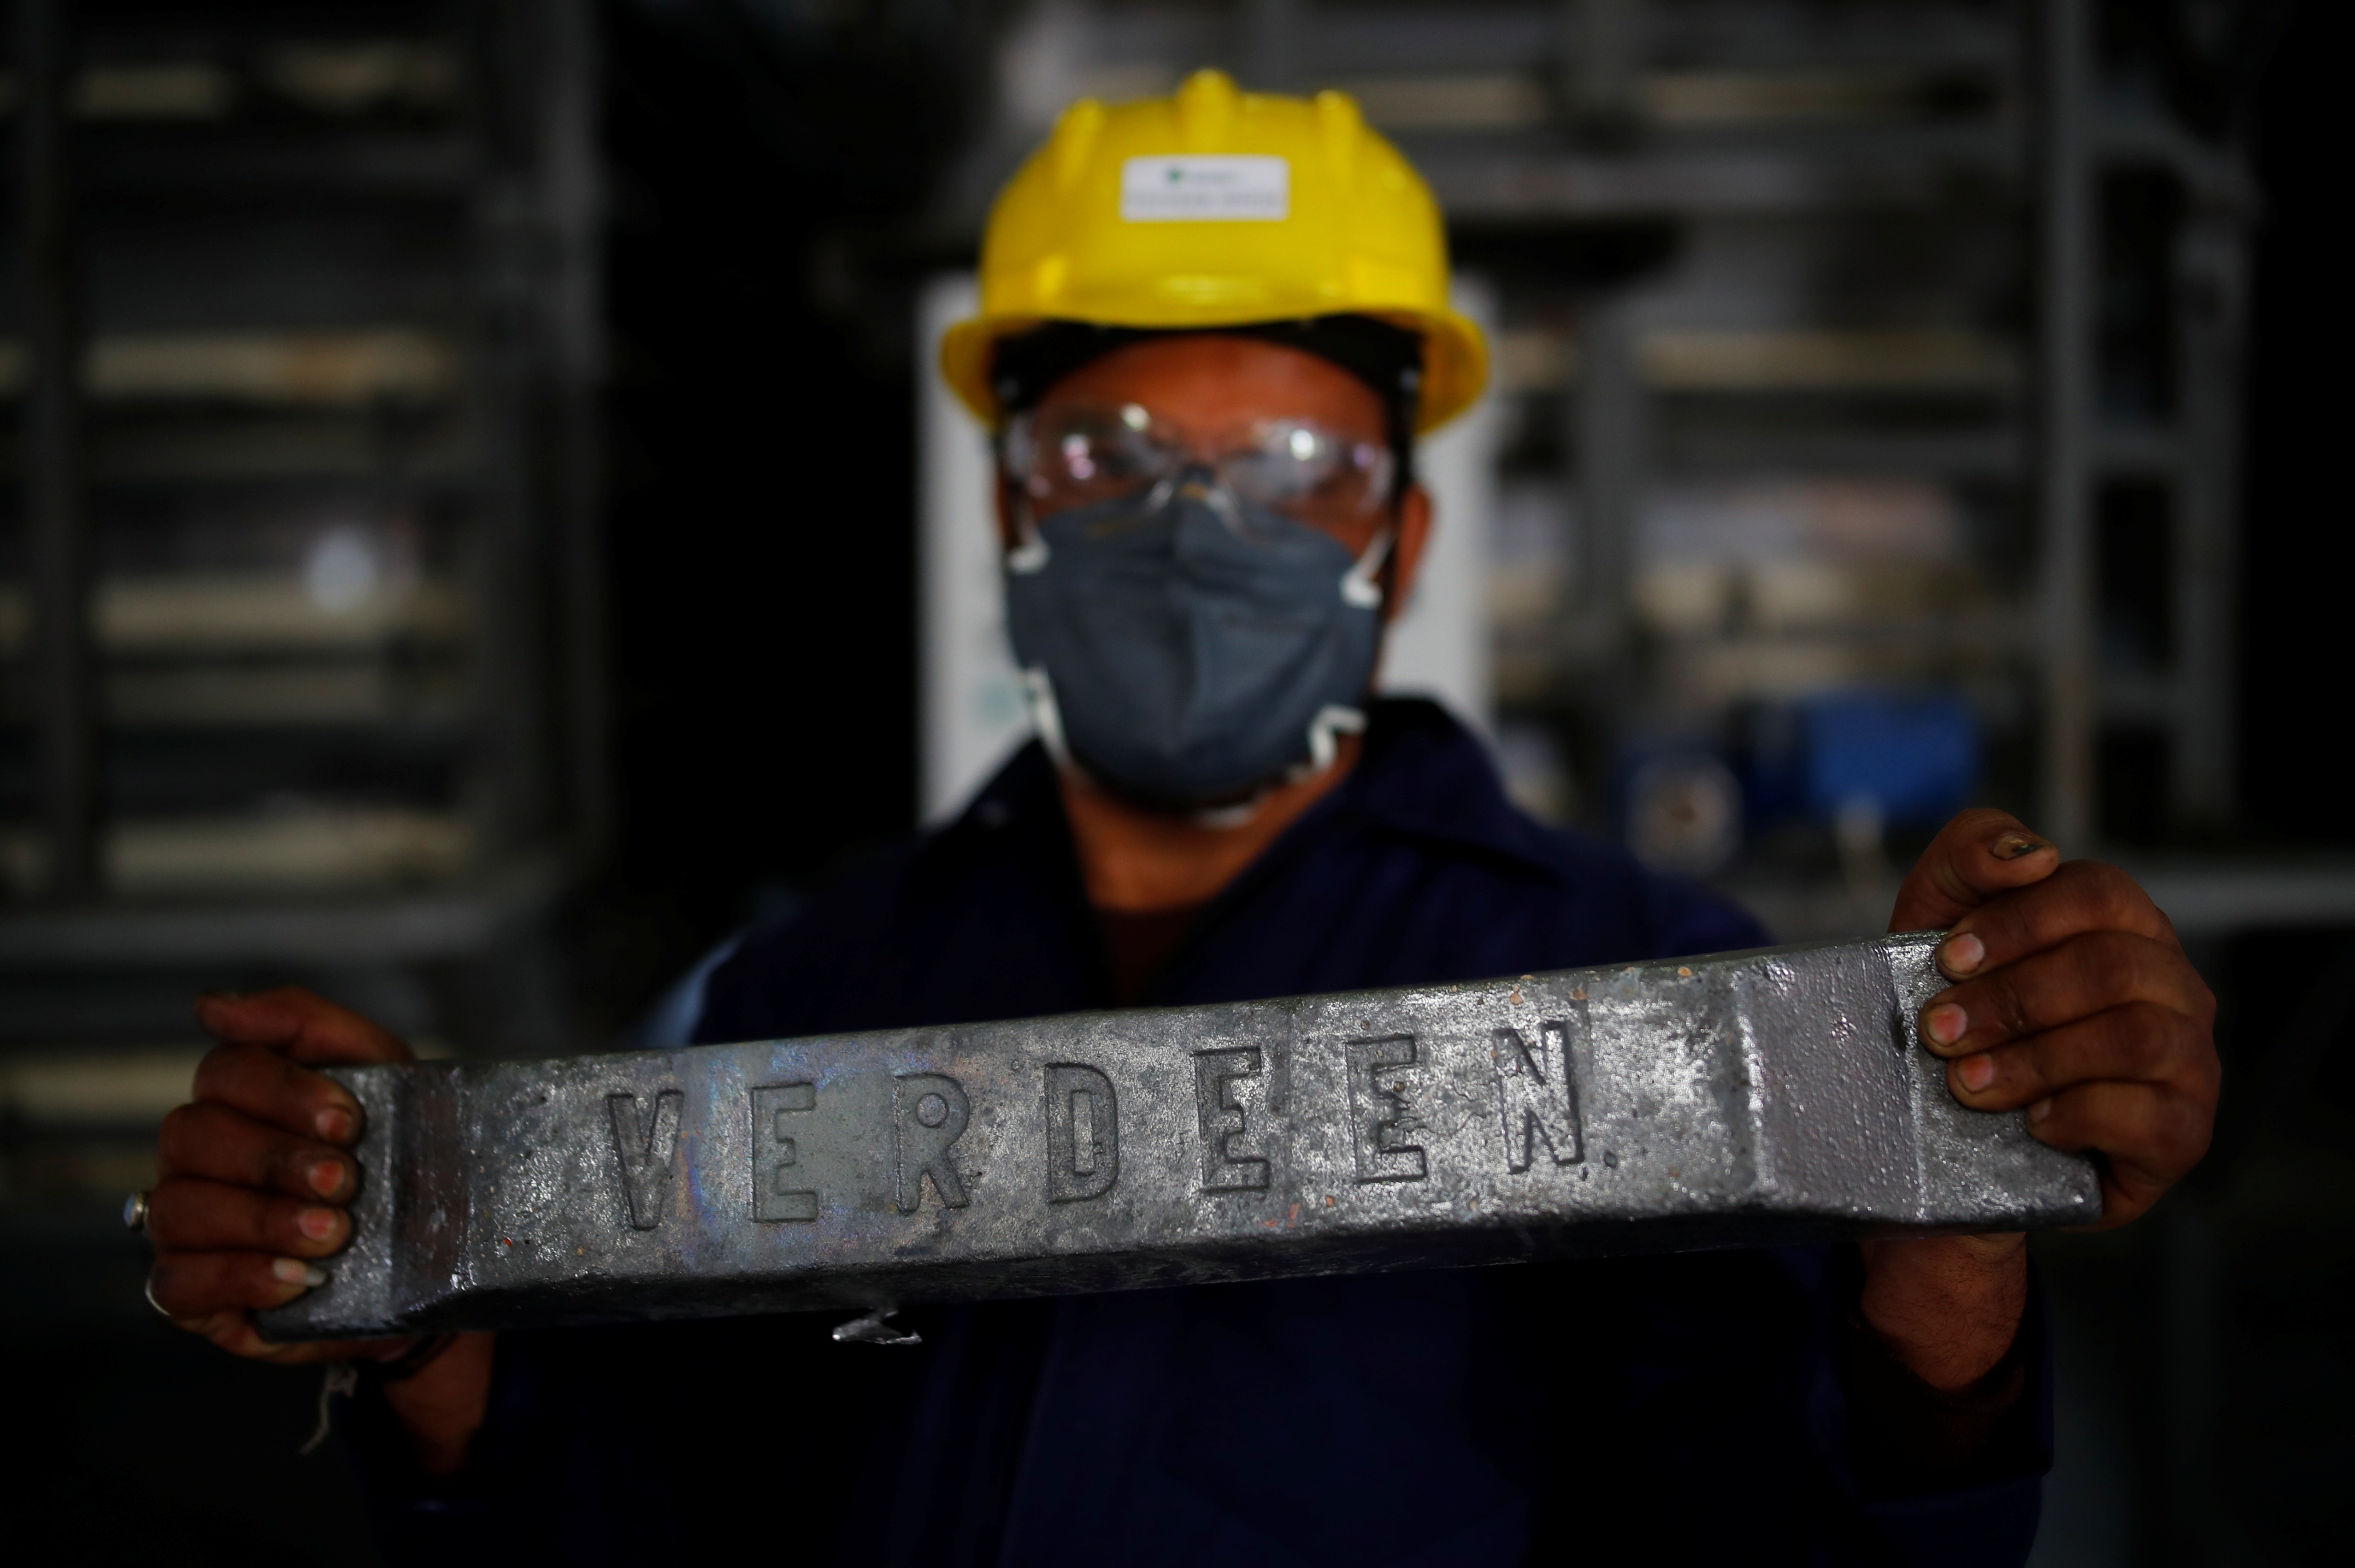 A worker shows an ingot made from lead at ACE Green recycling Inc in Ghaziabad